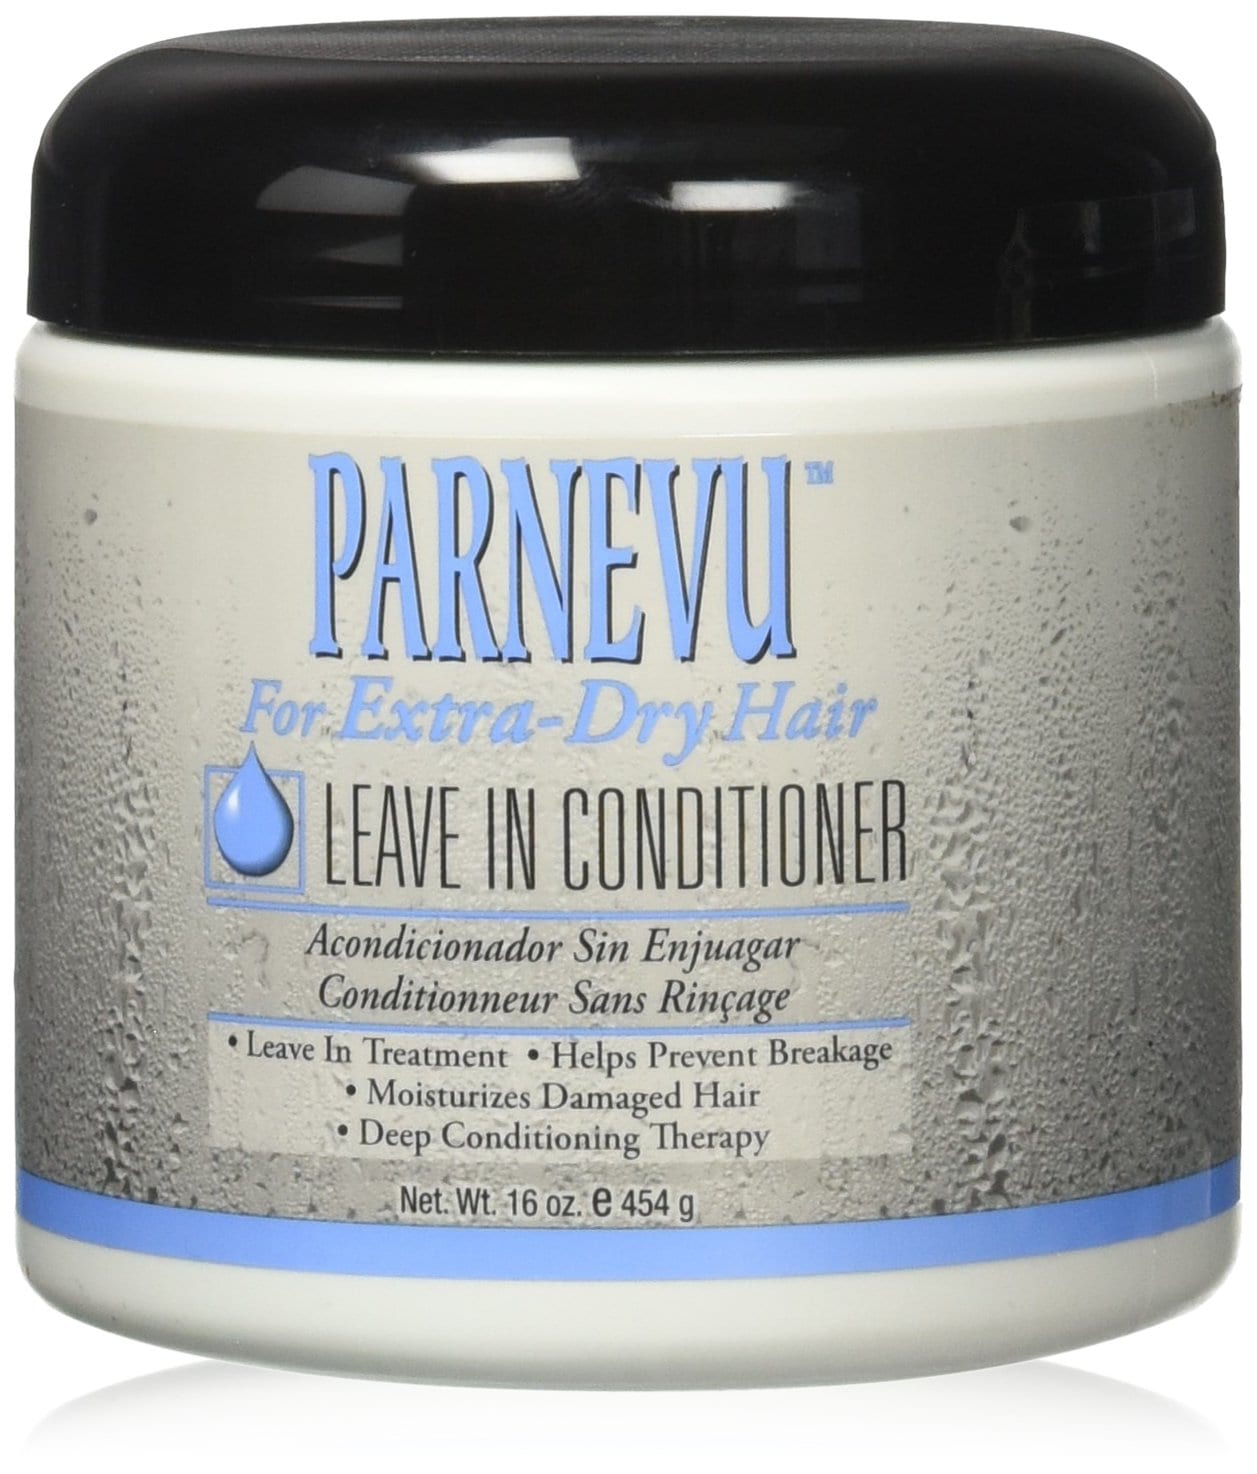 Parnevu Leave-in Conditioner for Extra Dry Hair, 16 Ounce